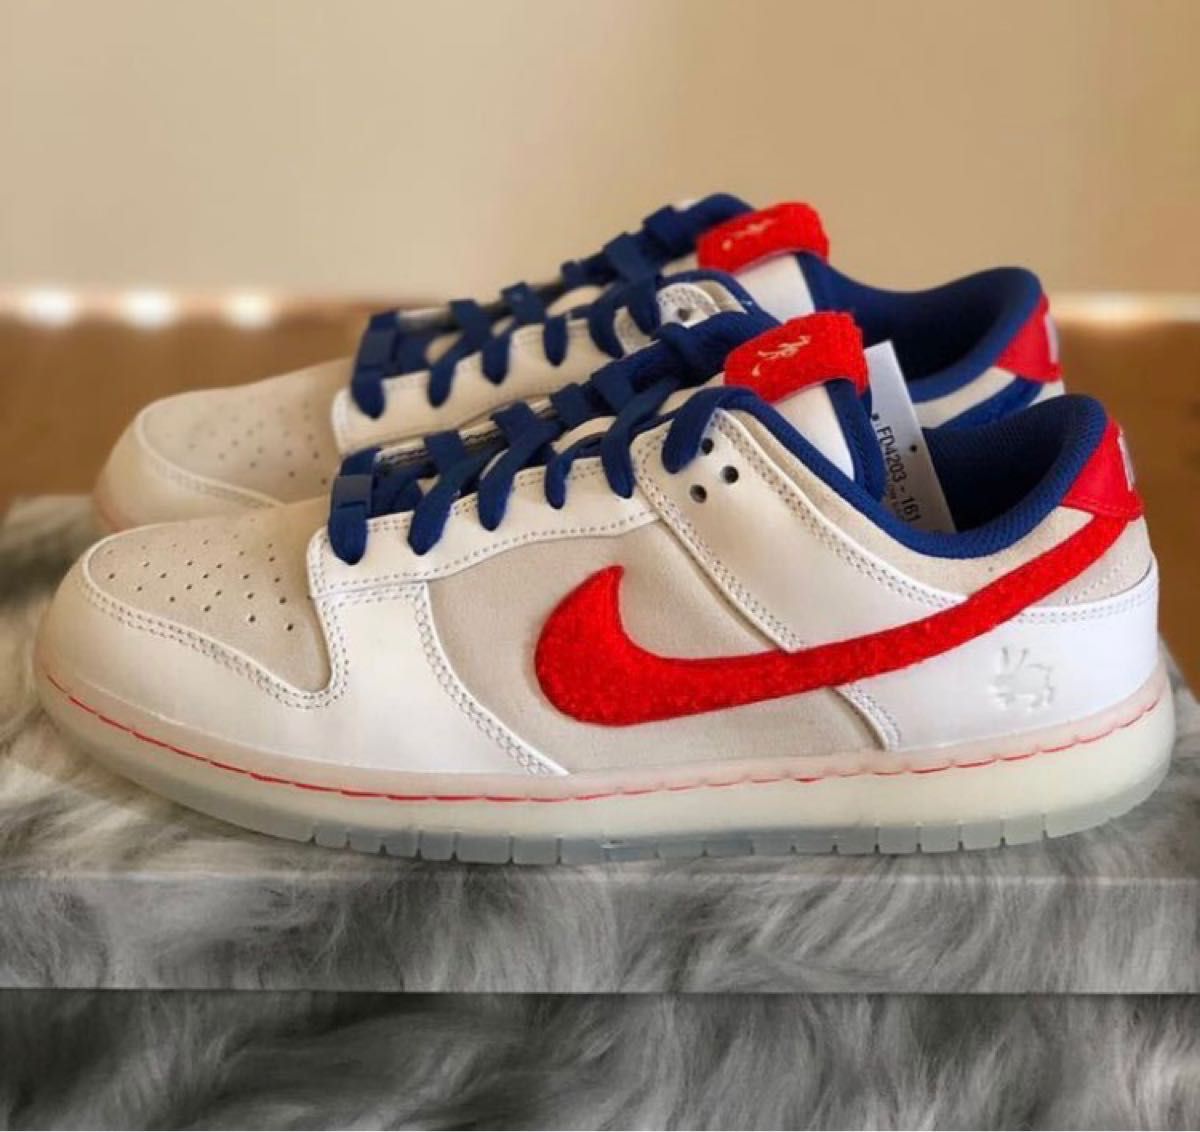 Nike Dunk Low Year of the Rabbit 26㎝ ナイキ ダンク ロー｜PayPayフリマ